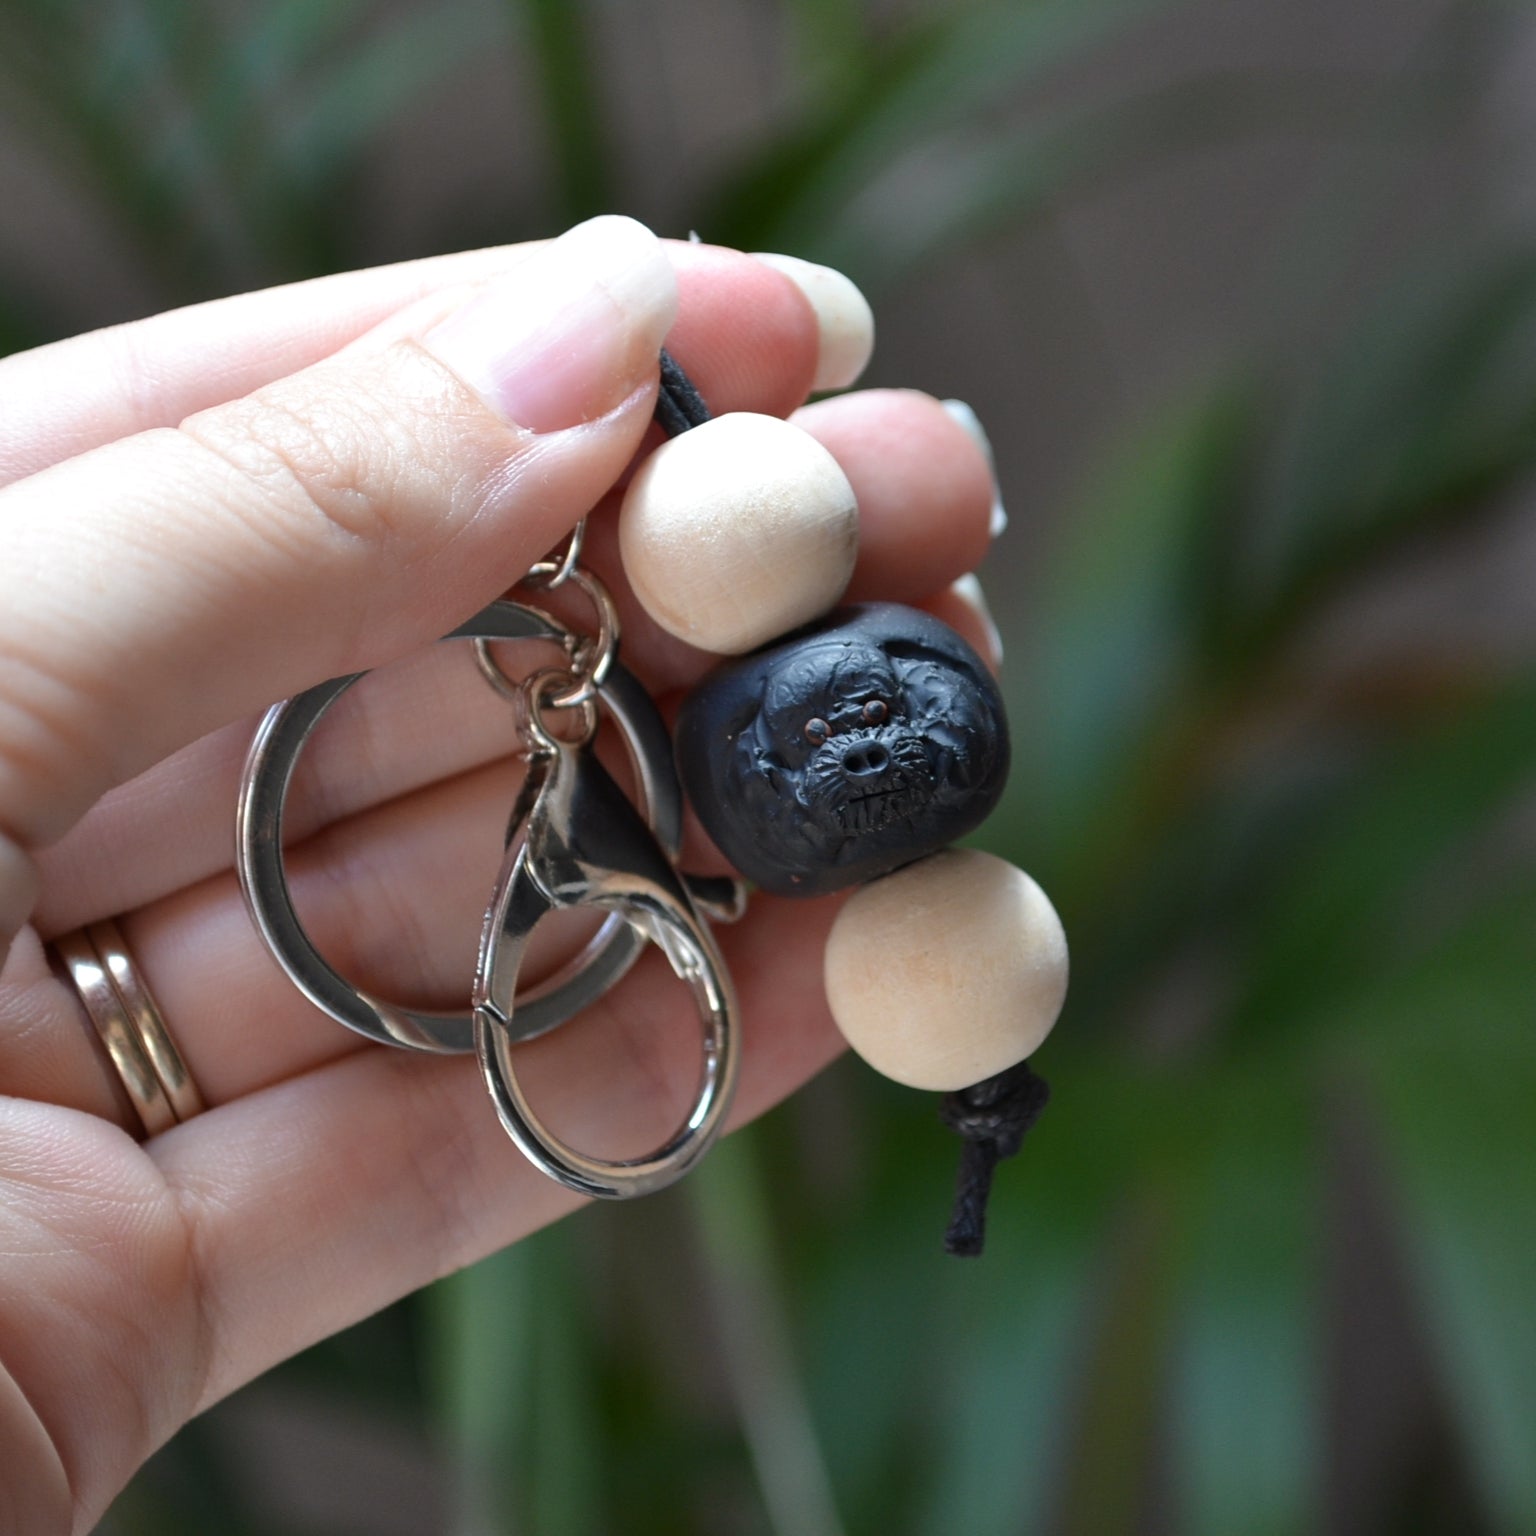 Handmade timber and polymer clay black poodle keychain being held in front of a green palm plant background.